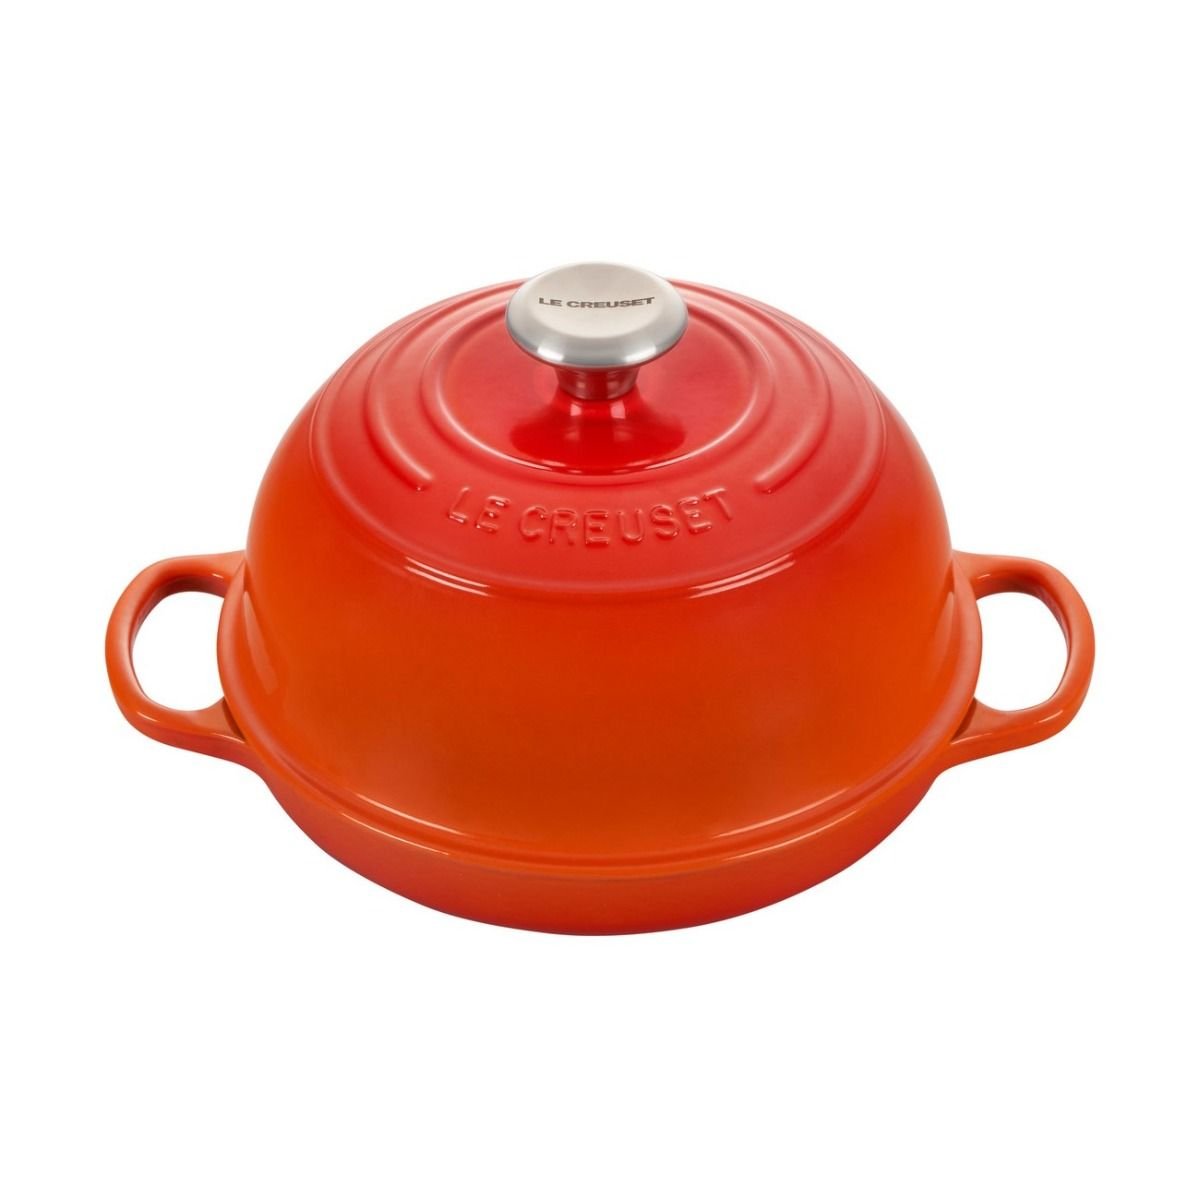 Le Creuset Enameled Cast-Iron 9-Inch Skillet with Iron Handle, Flame